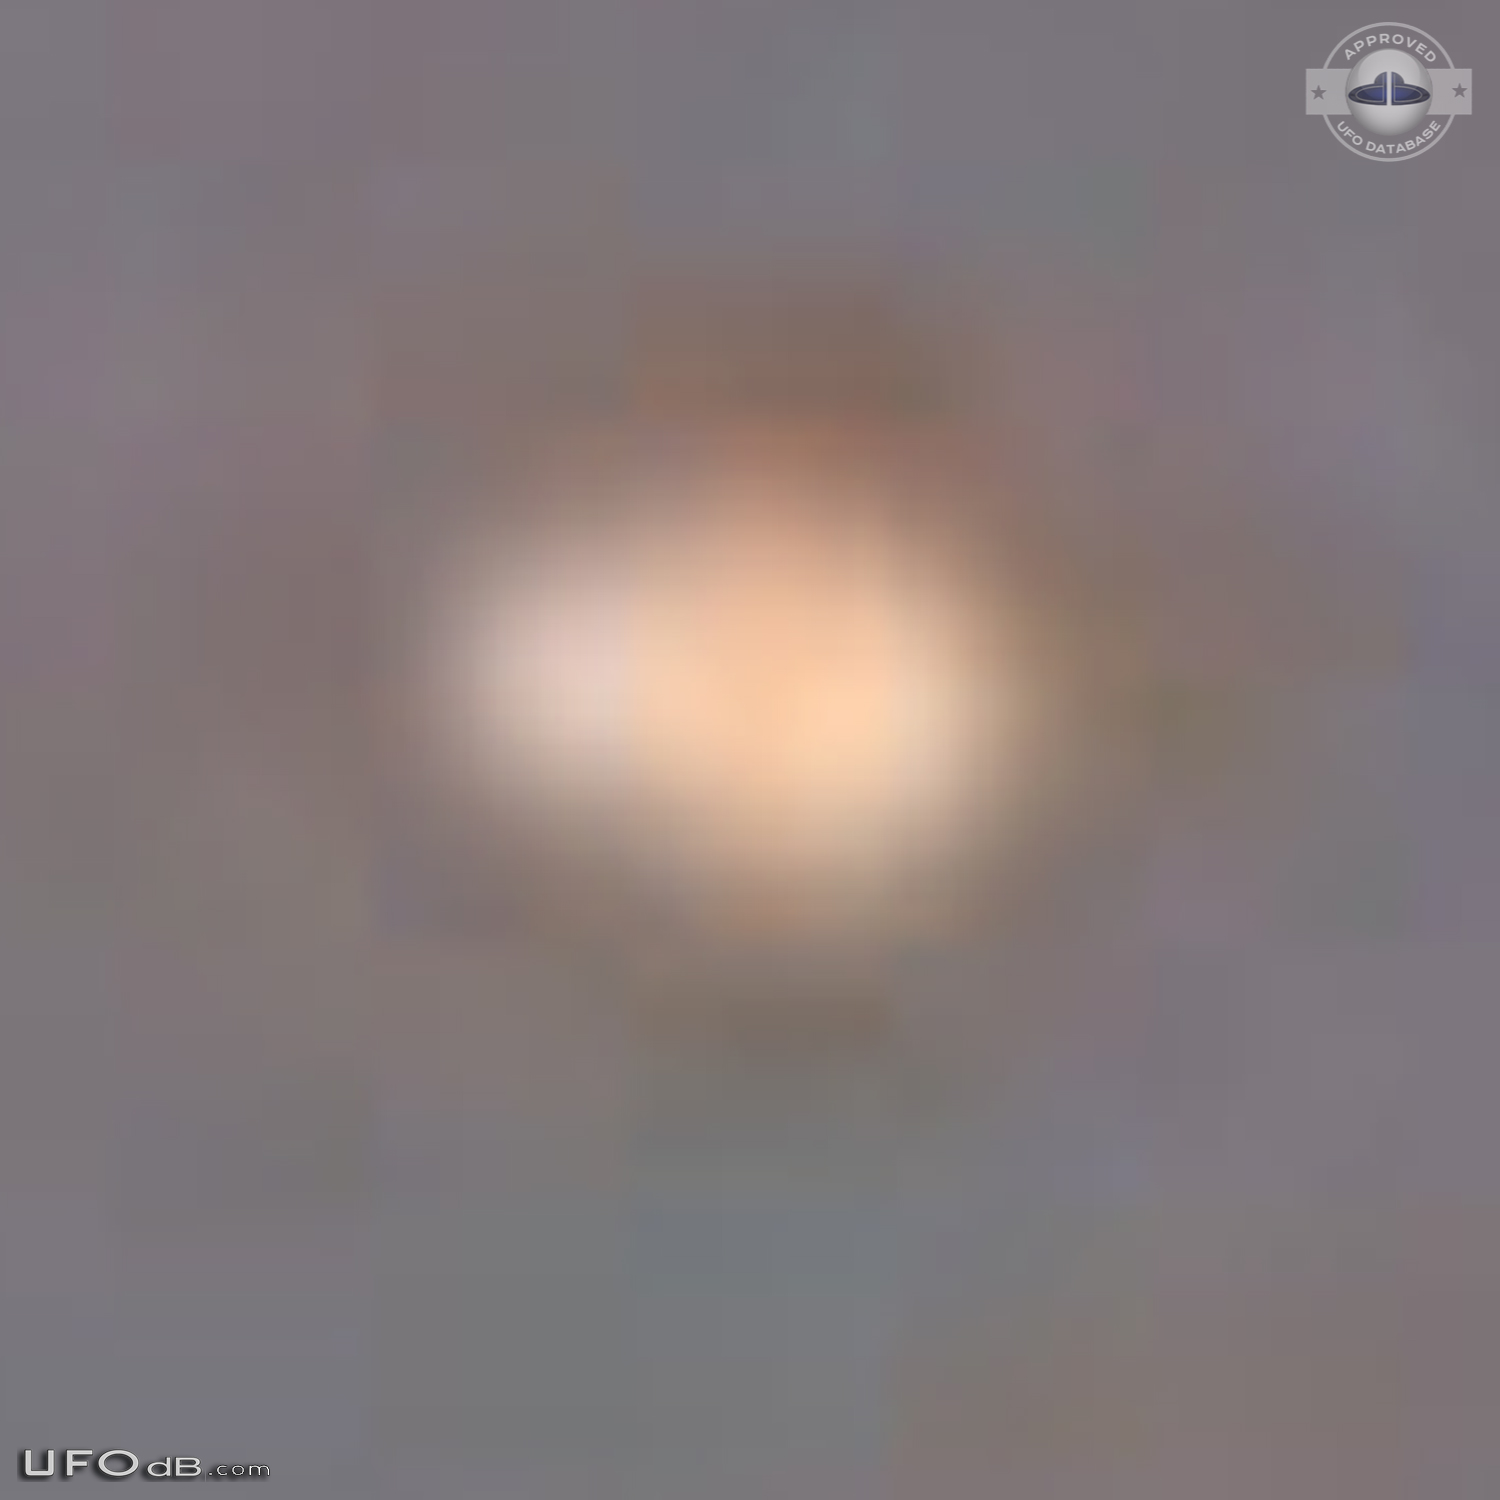 Day light large silver UFO in Fremantle Western Australia January 2015 UFO Picture #655-5